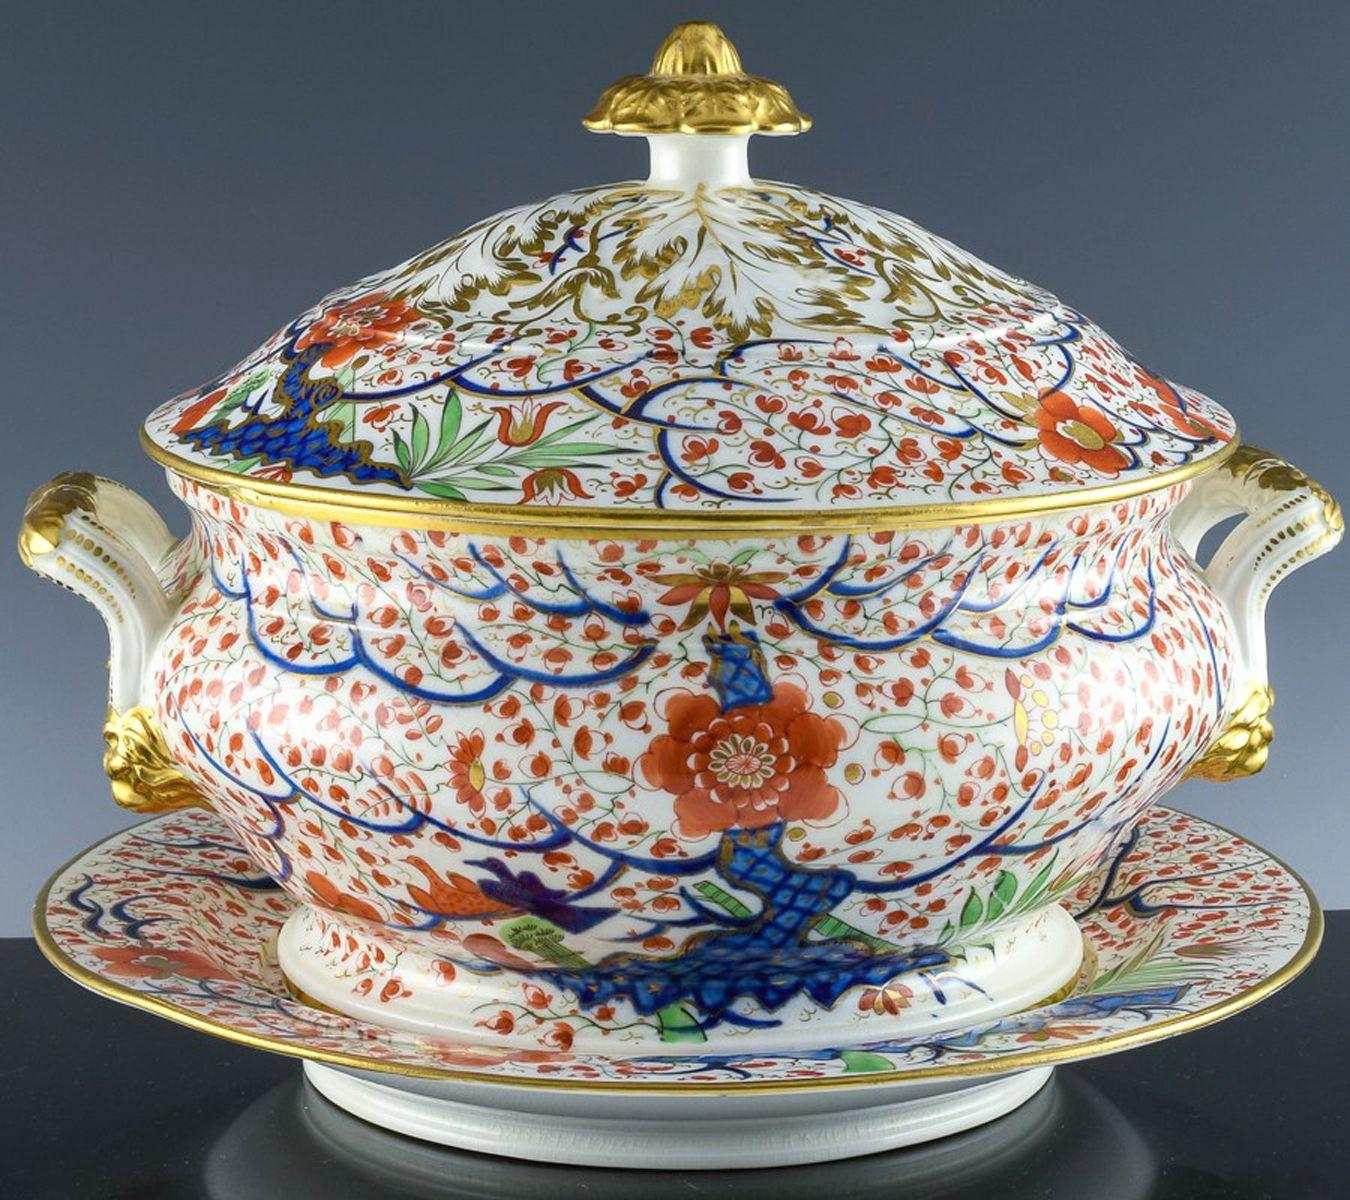 Regency Period Chamberlain Worcester Porcelain Soup Tureen, Cover and Stand In Good Condition For Sale In Downingtown, PA